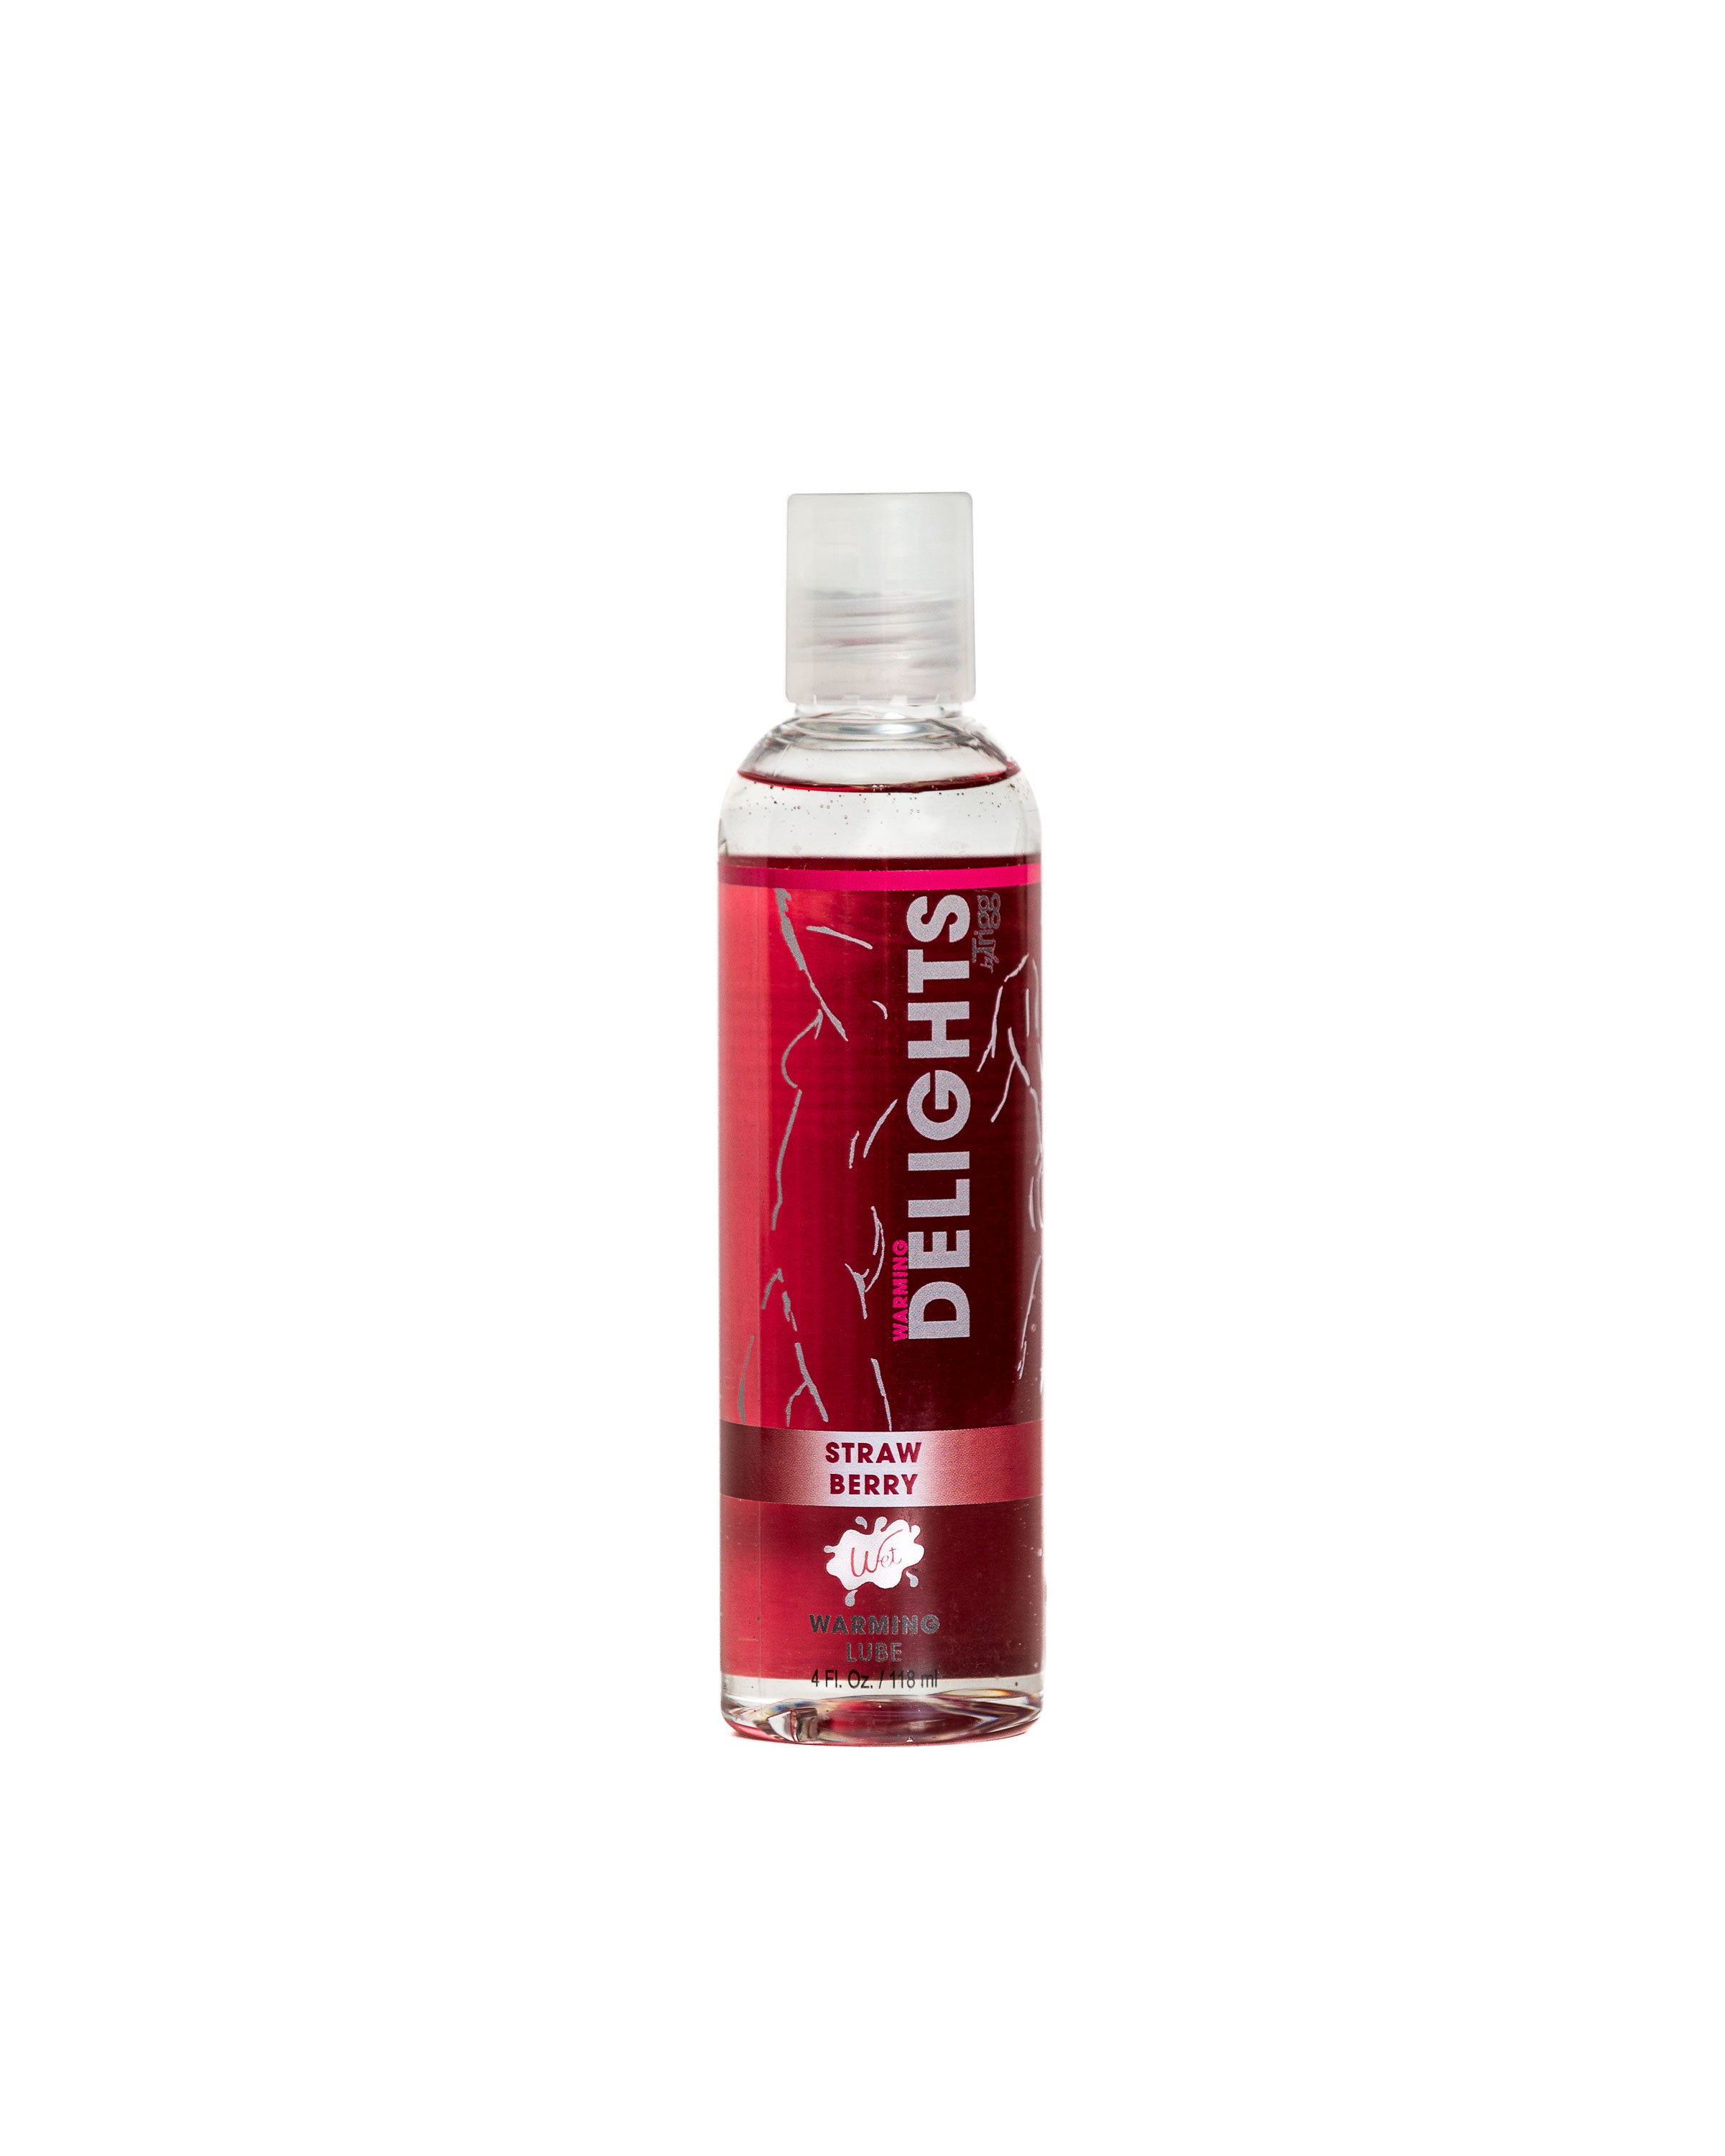 Warming Delights - Strawberry - Flavored Lube 4 Oz-0